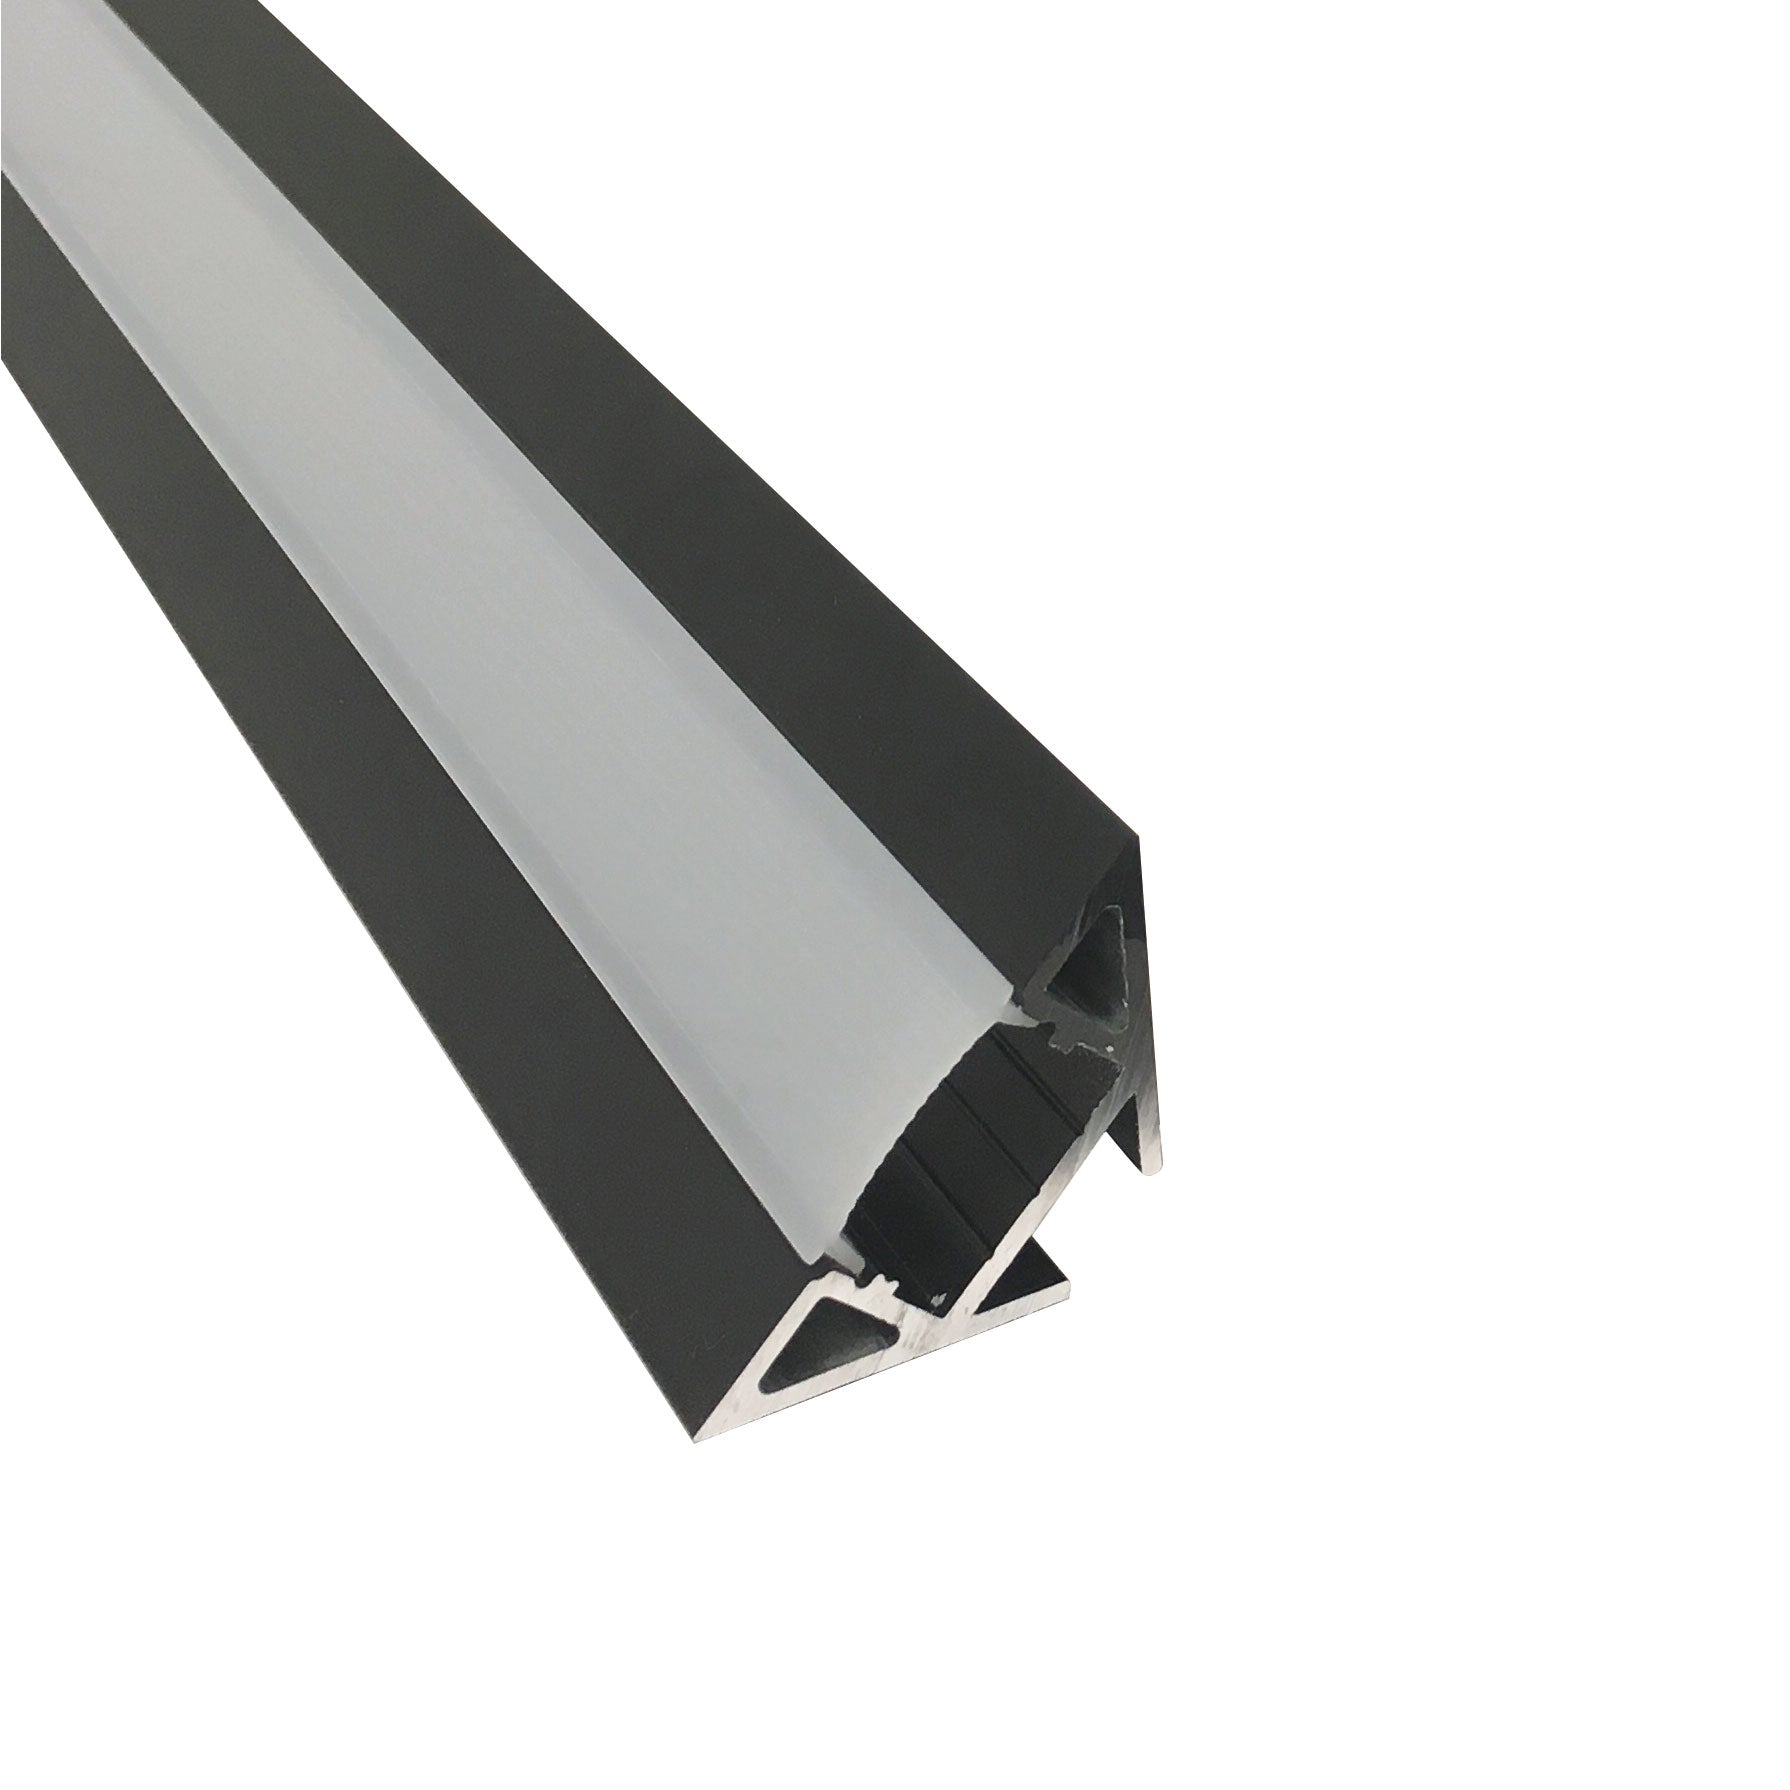 Nora Lighting NATL-C28B 4-ft Corner Channel (Plastic Diffuser and End Caps Included) - Black